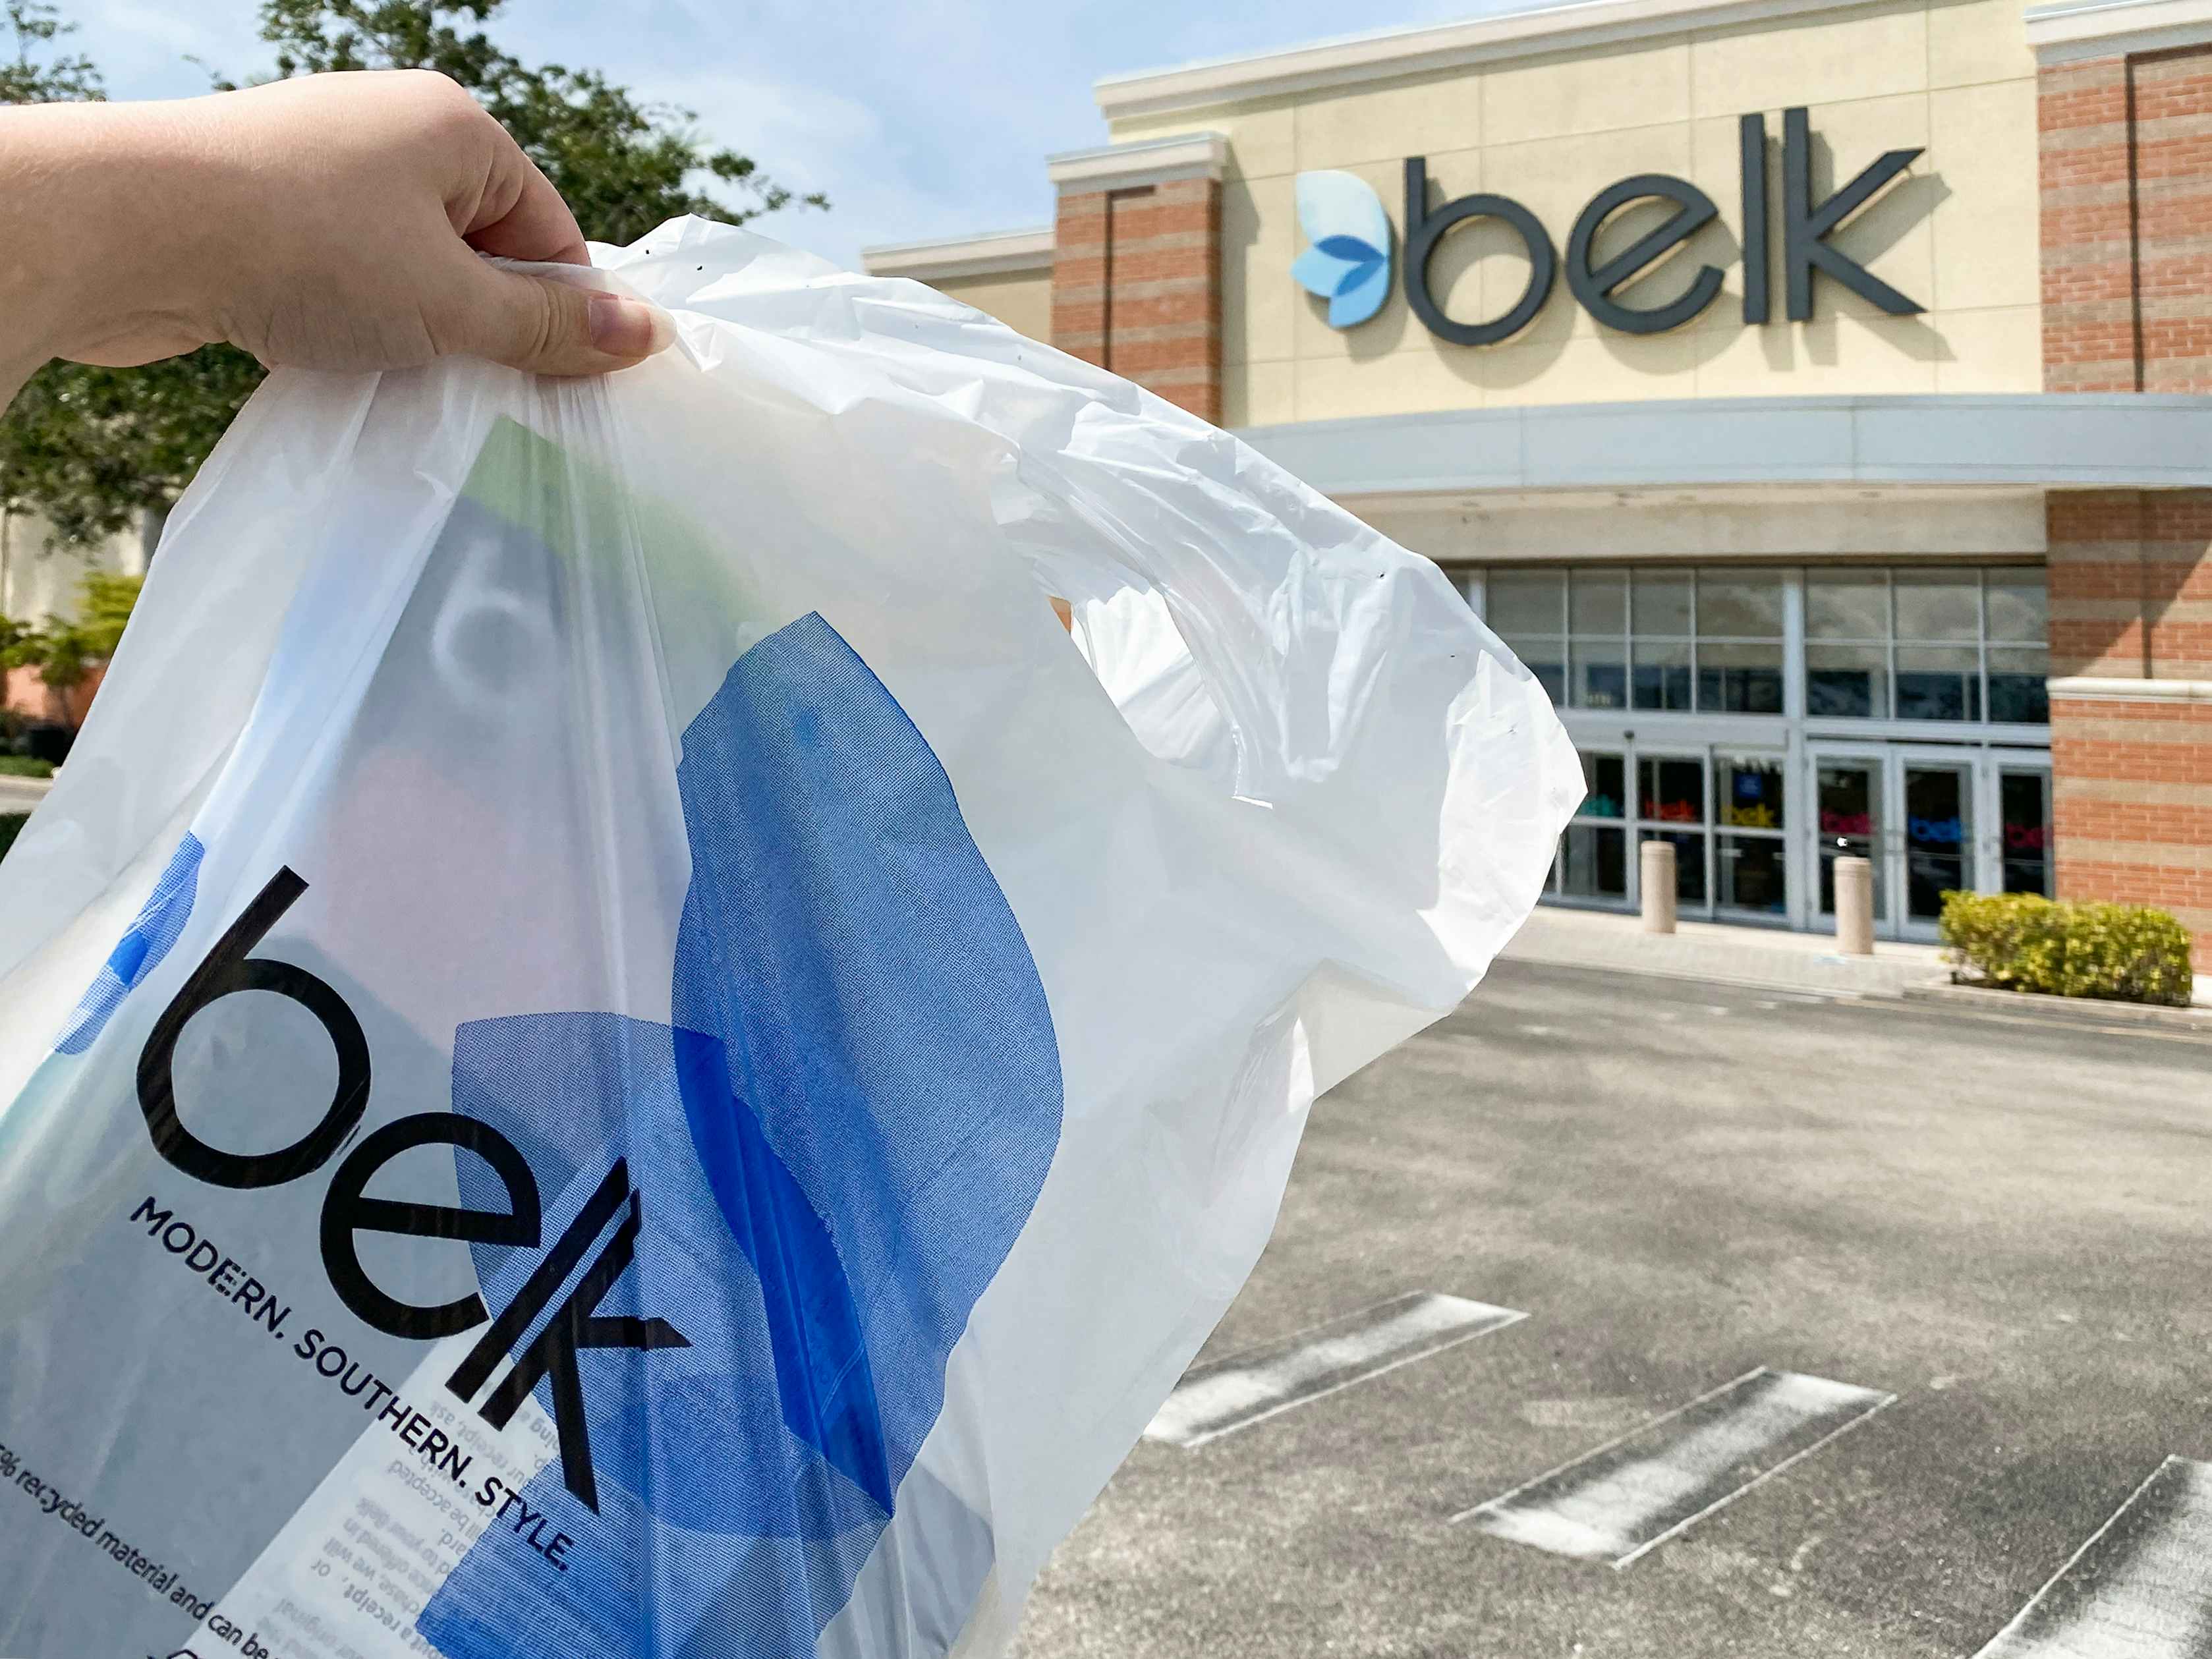 A person's hand holding up a Belk bag in front of a Belk store.